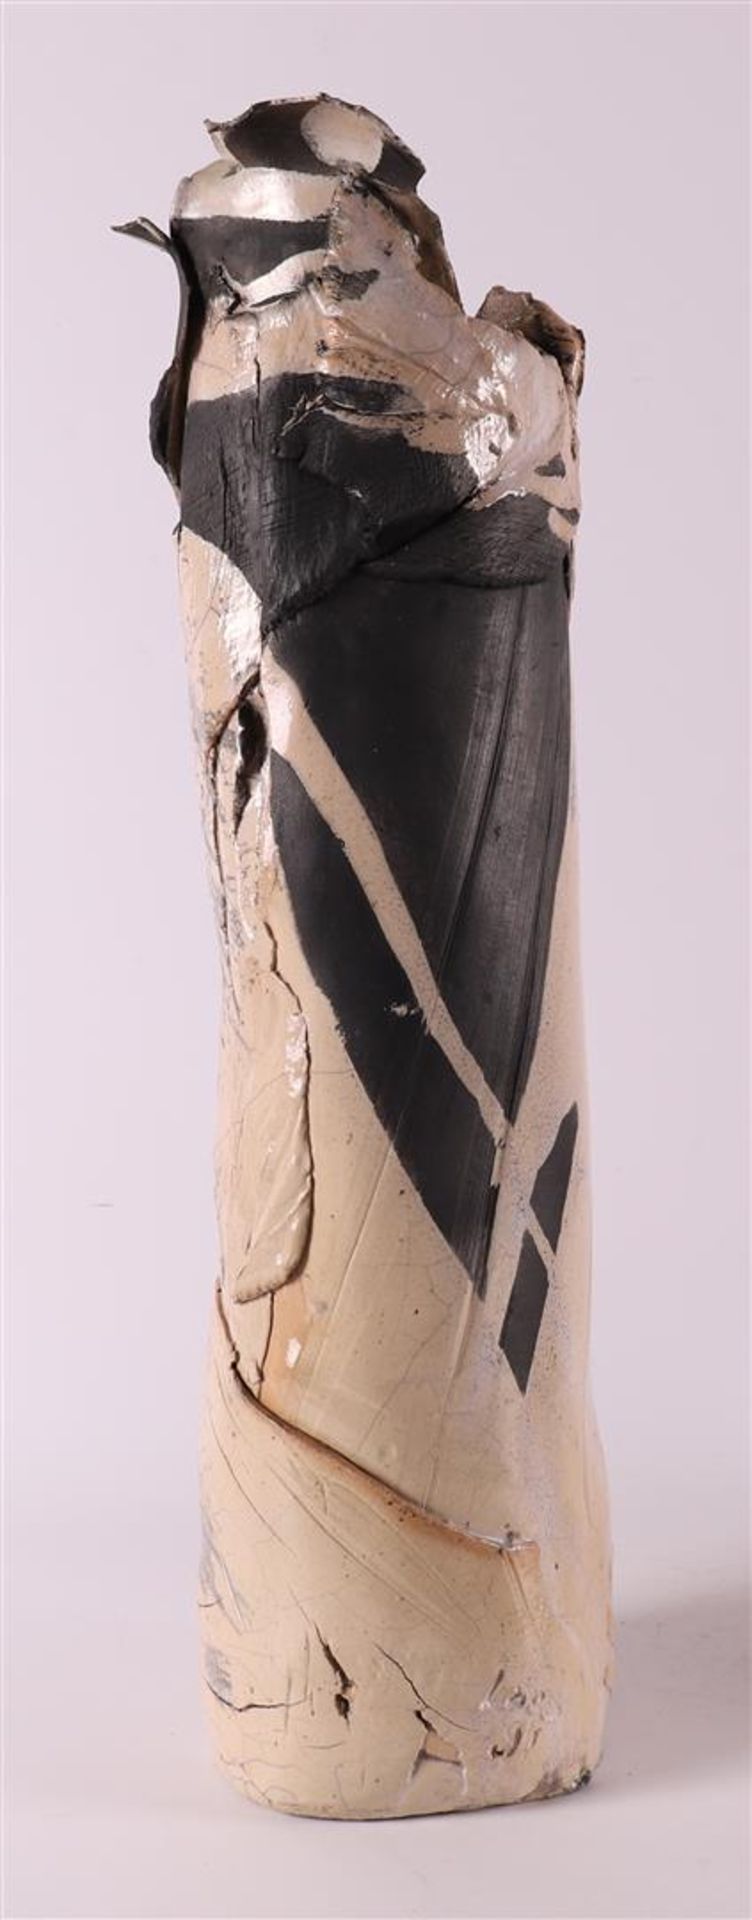 A polychrome ceramic vase, signed 'Loes 91' (= possibly Loes Koster). - Bild 8 aus 18